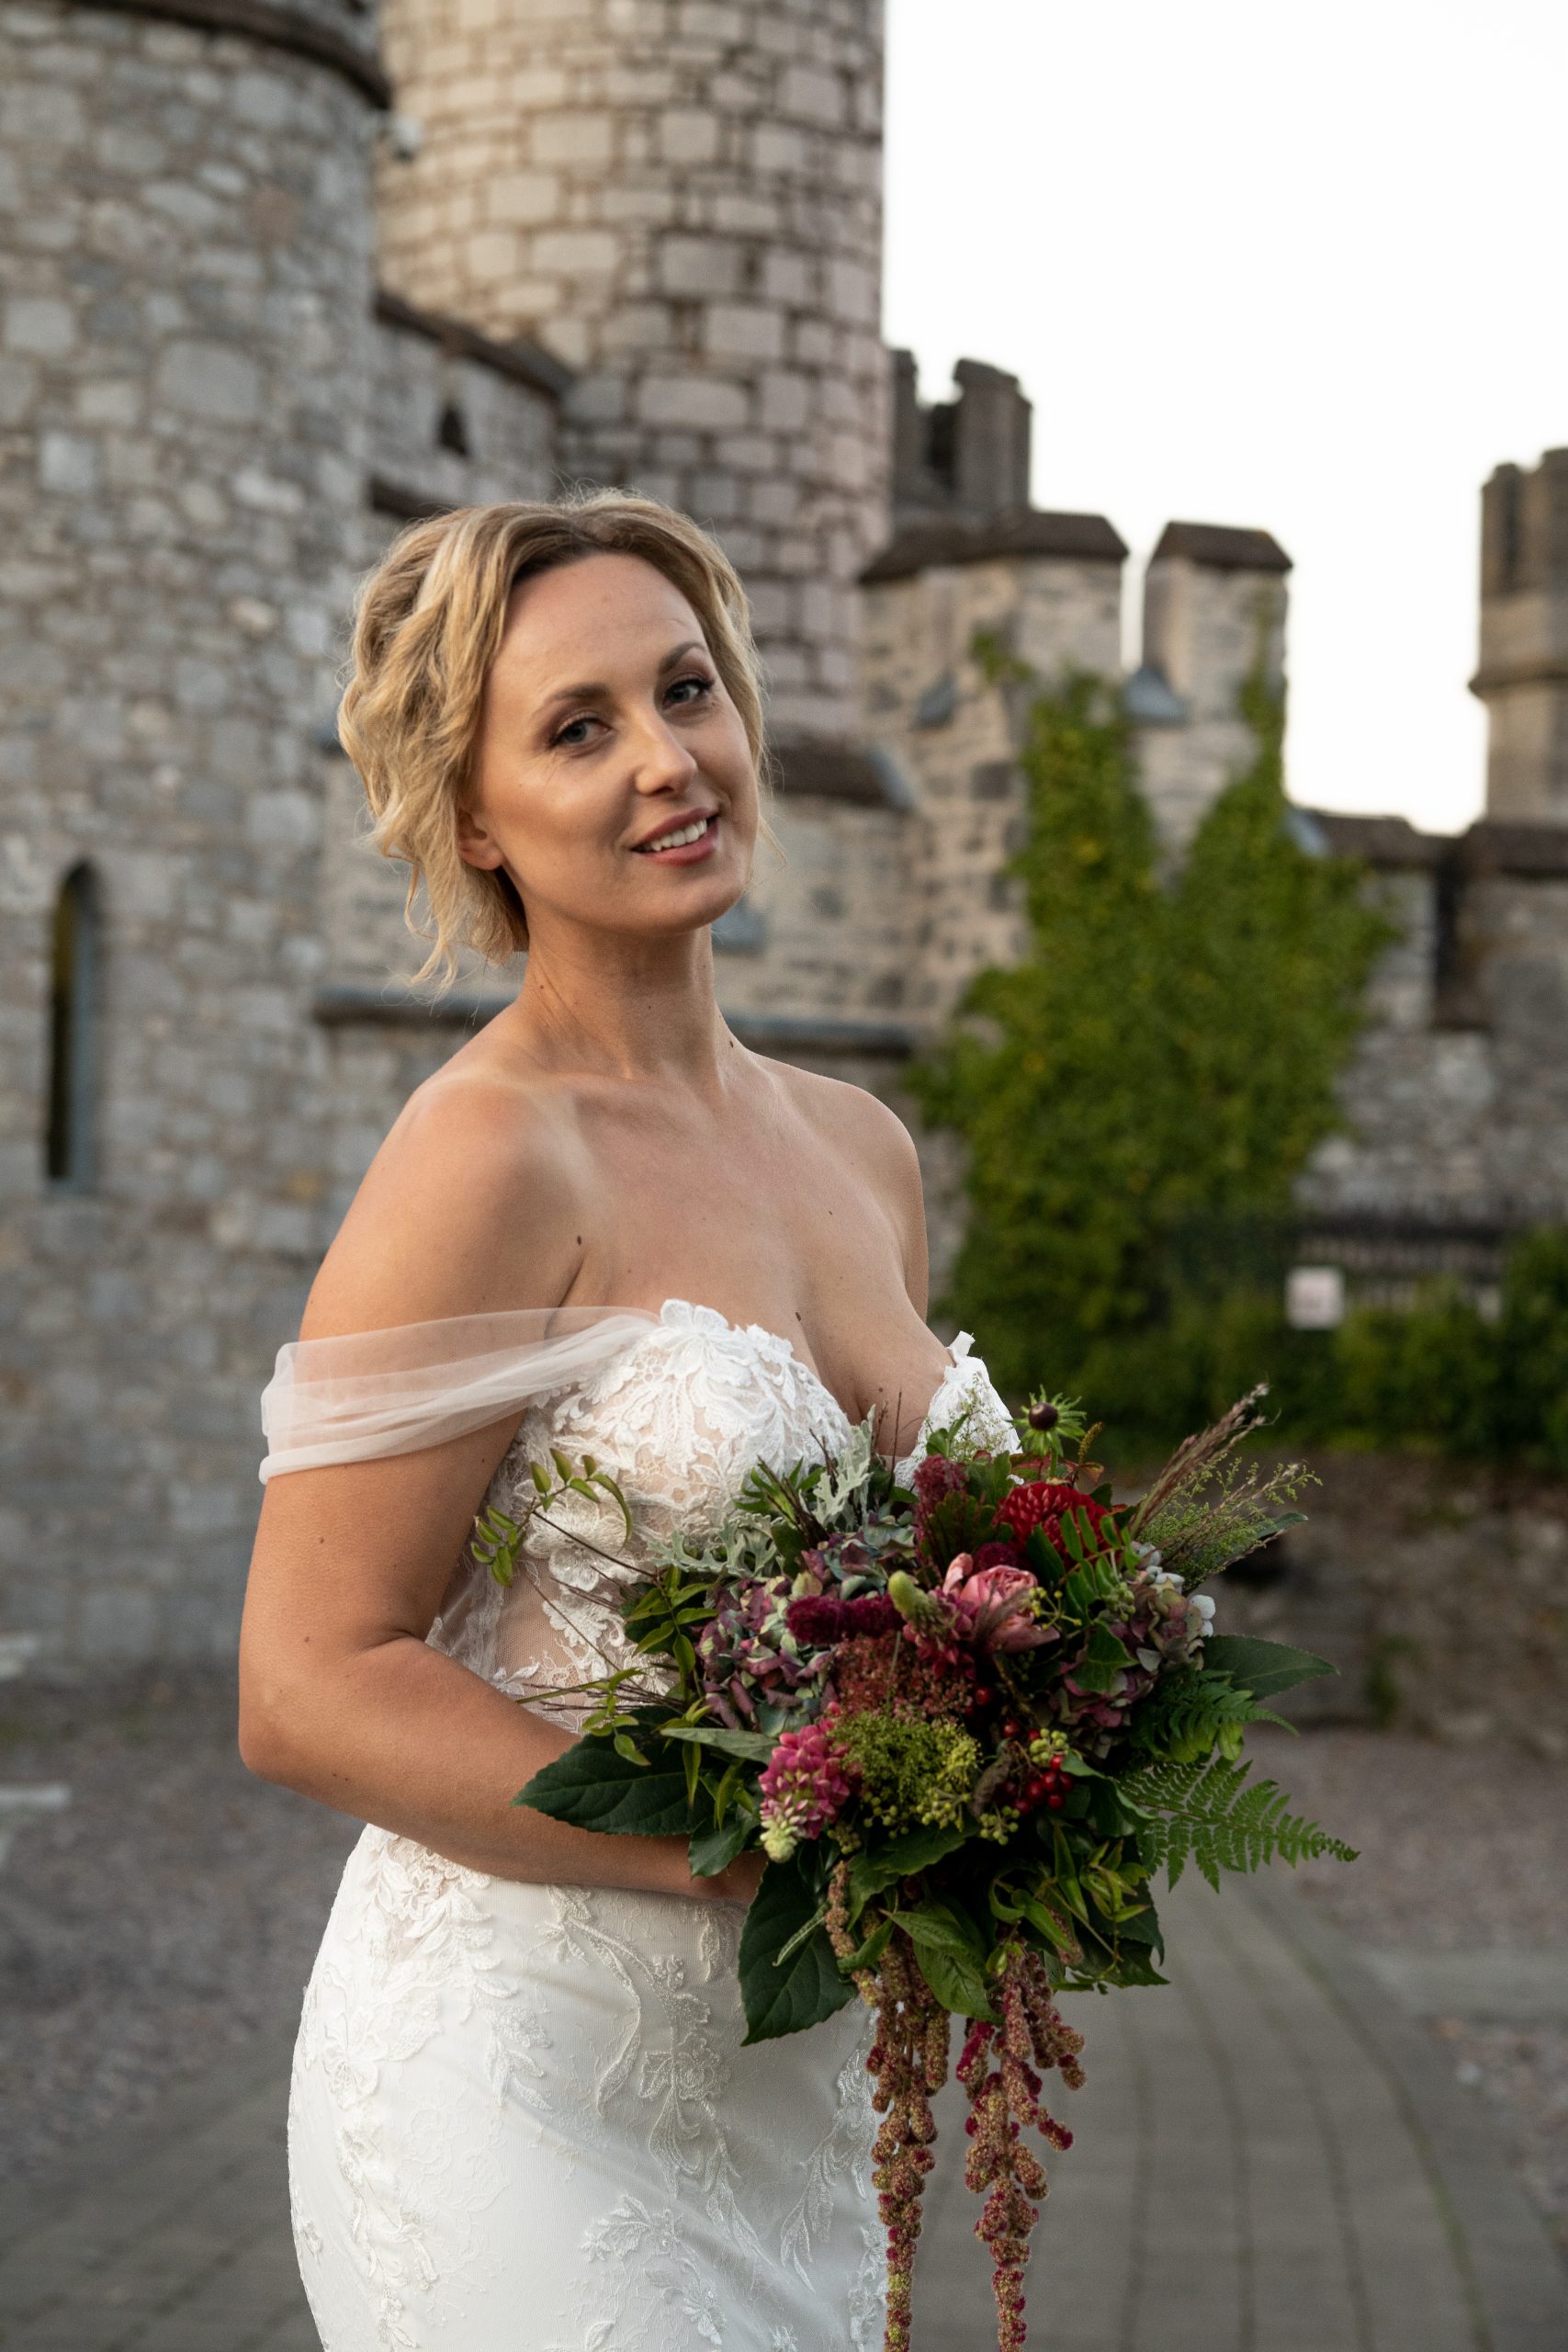 A bride in front of the castle